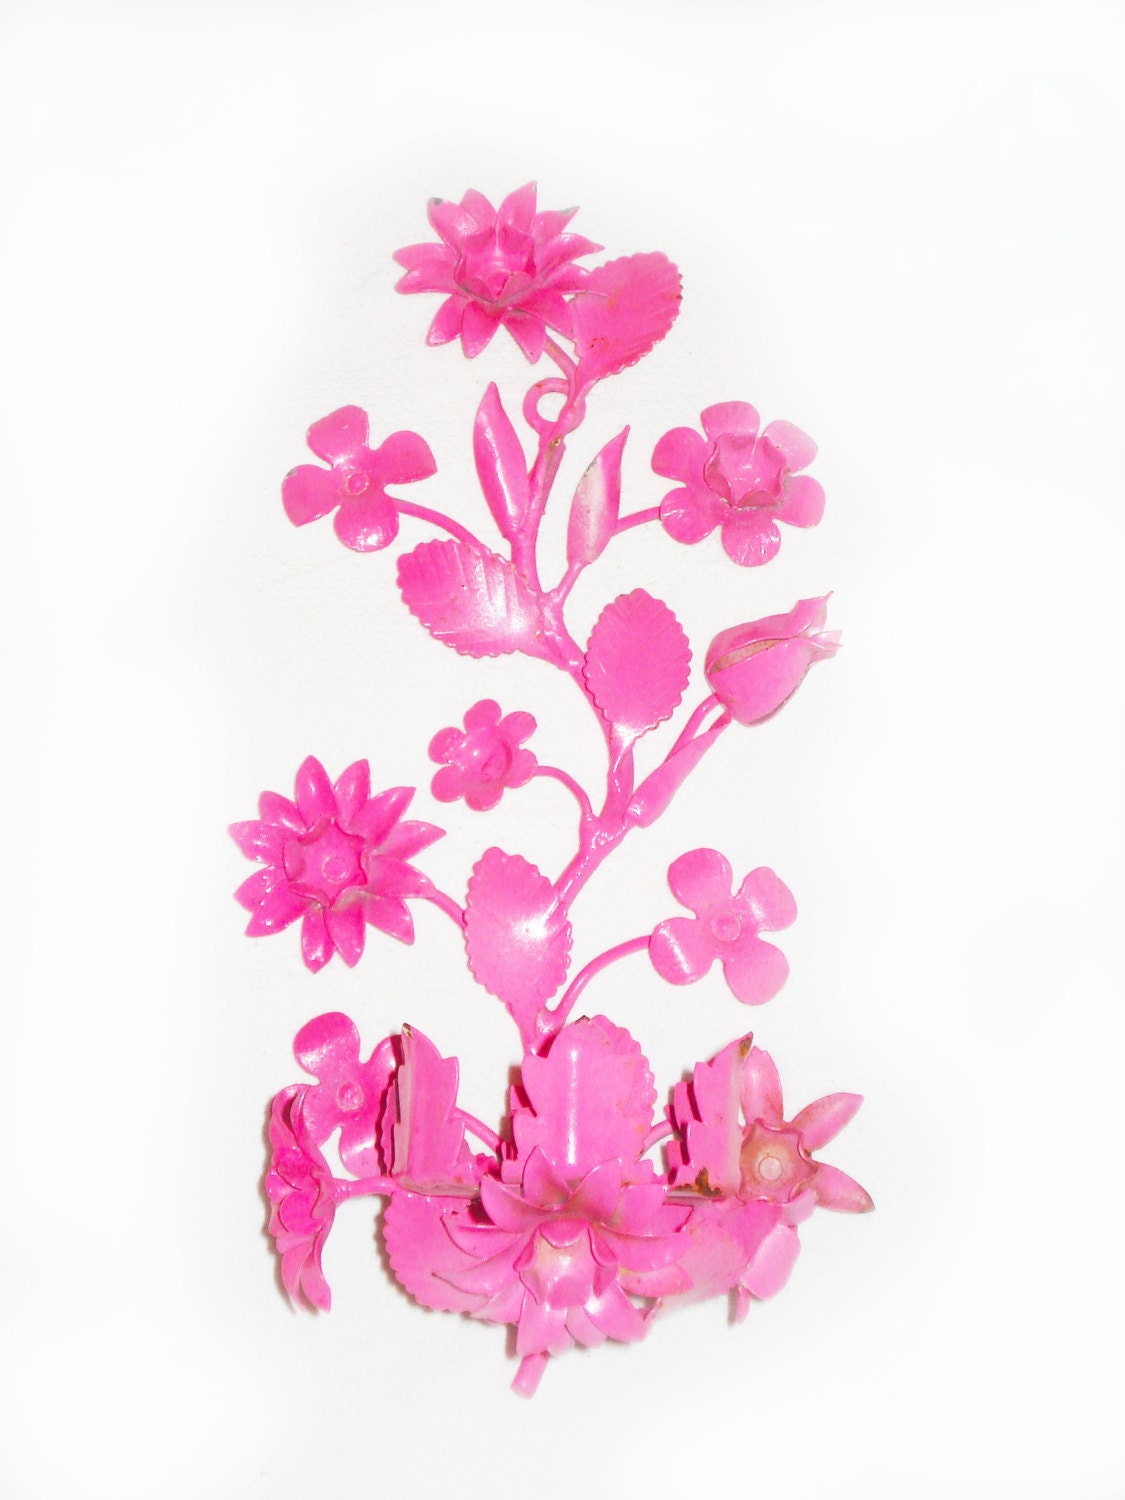 Popular items for pink sconce on Etsy